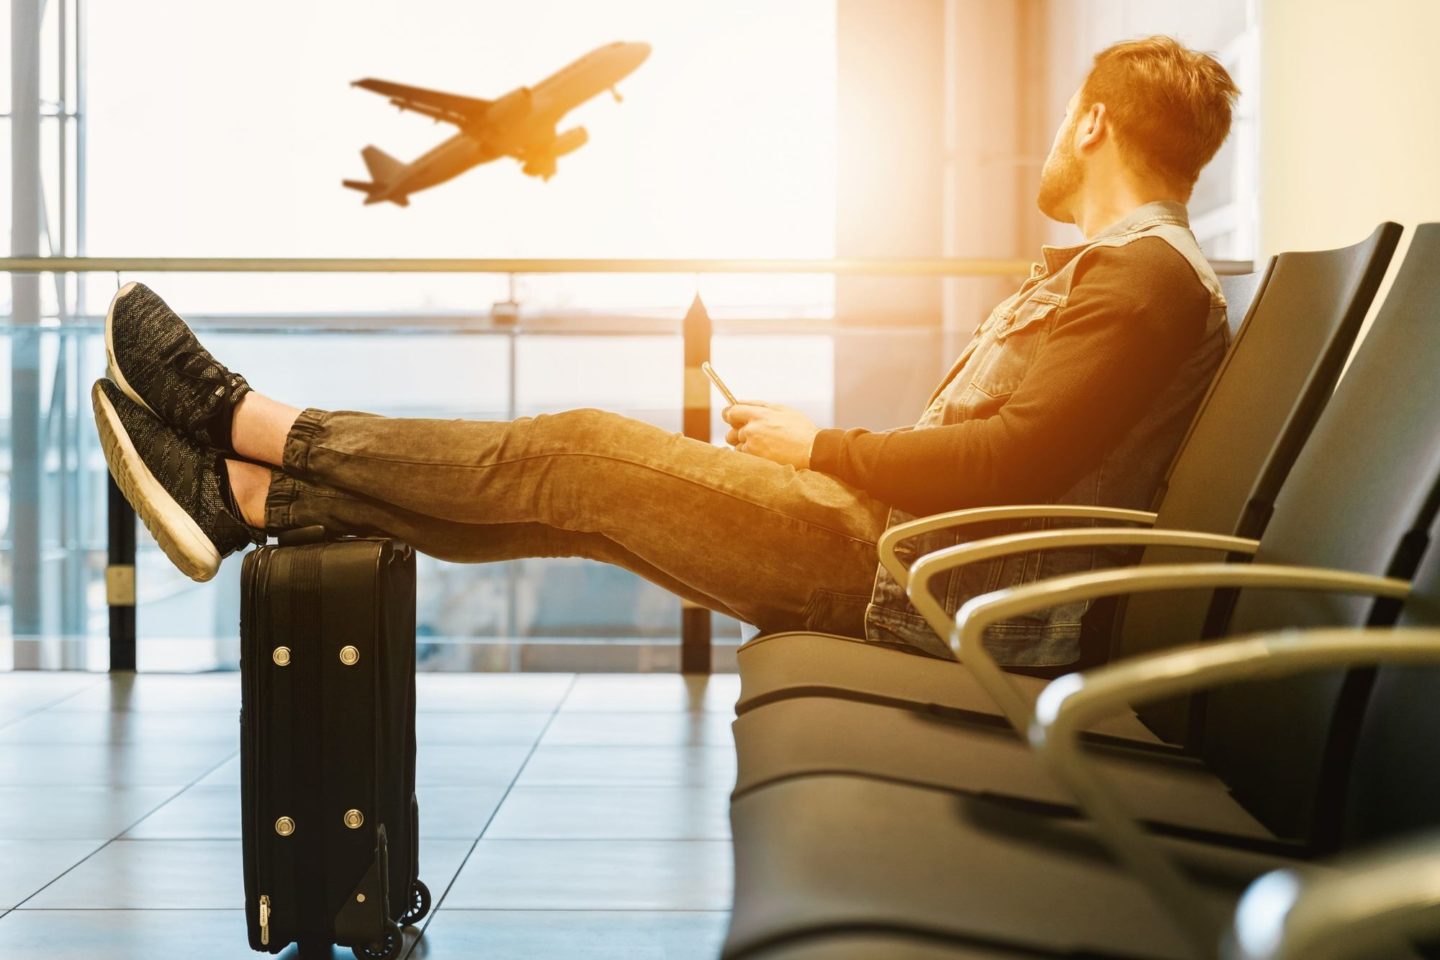 Man watching airplane with feet on luggage